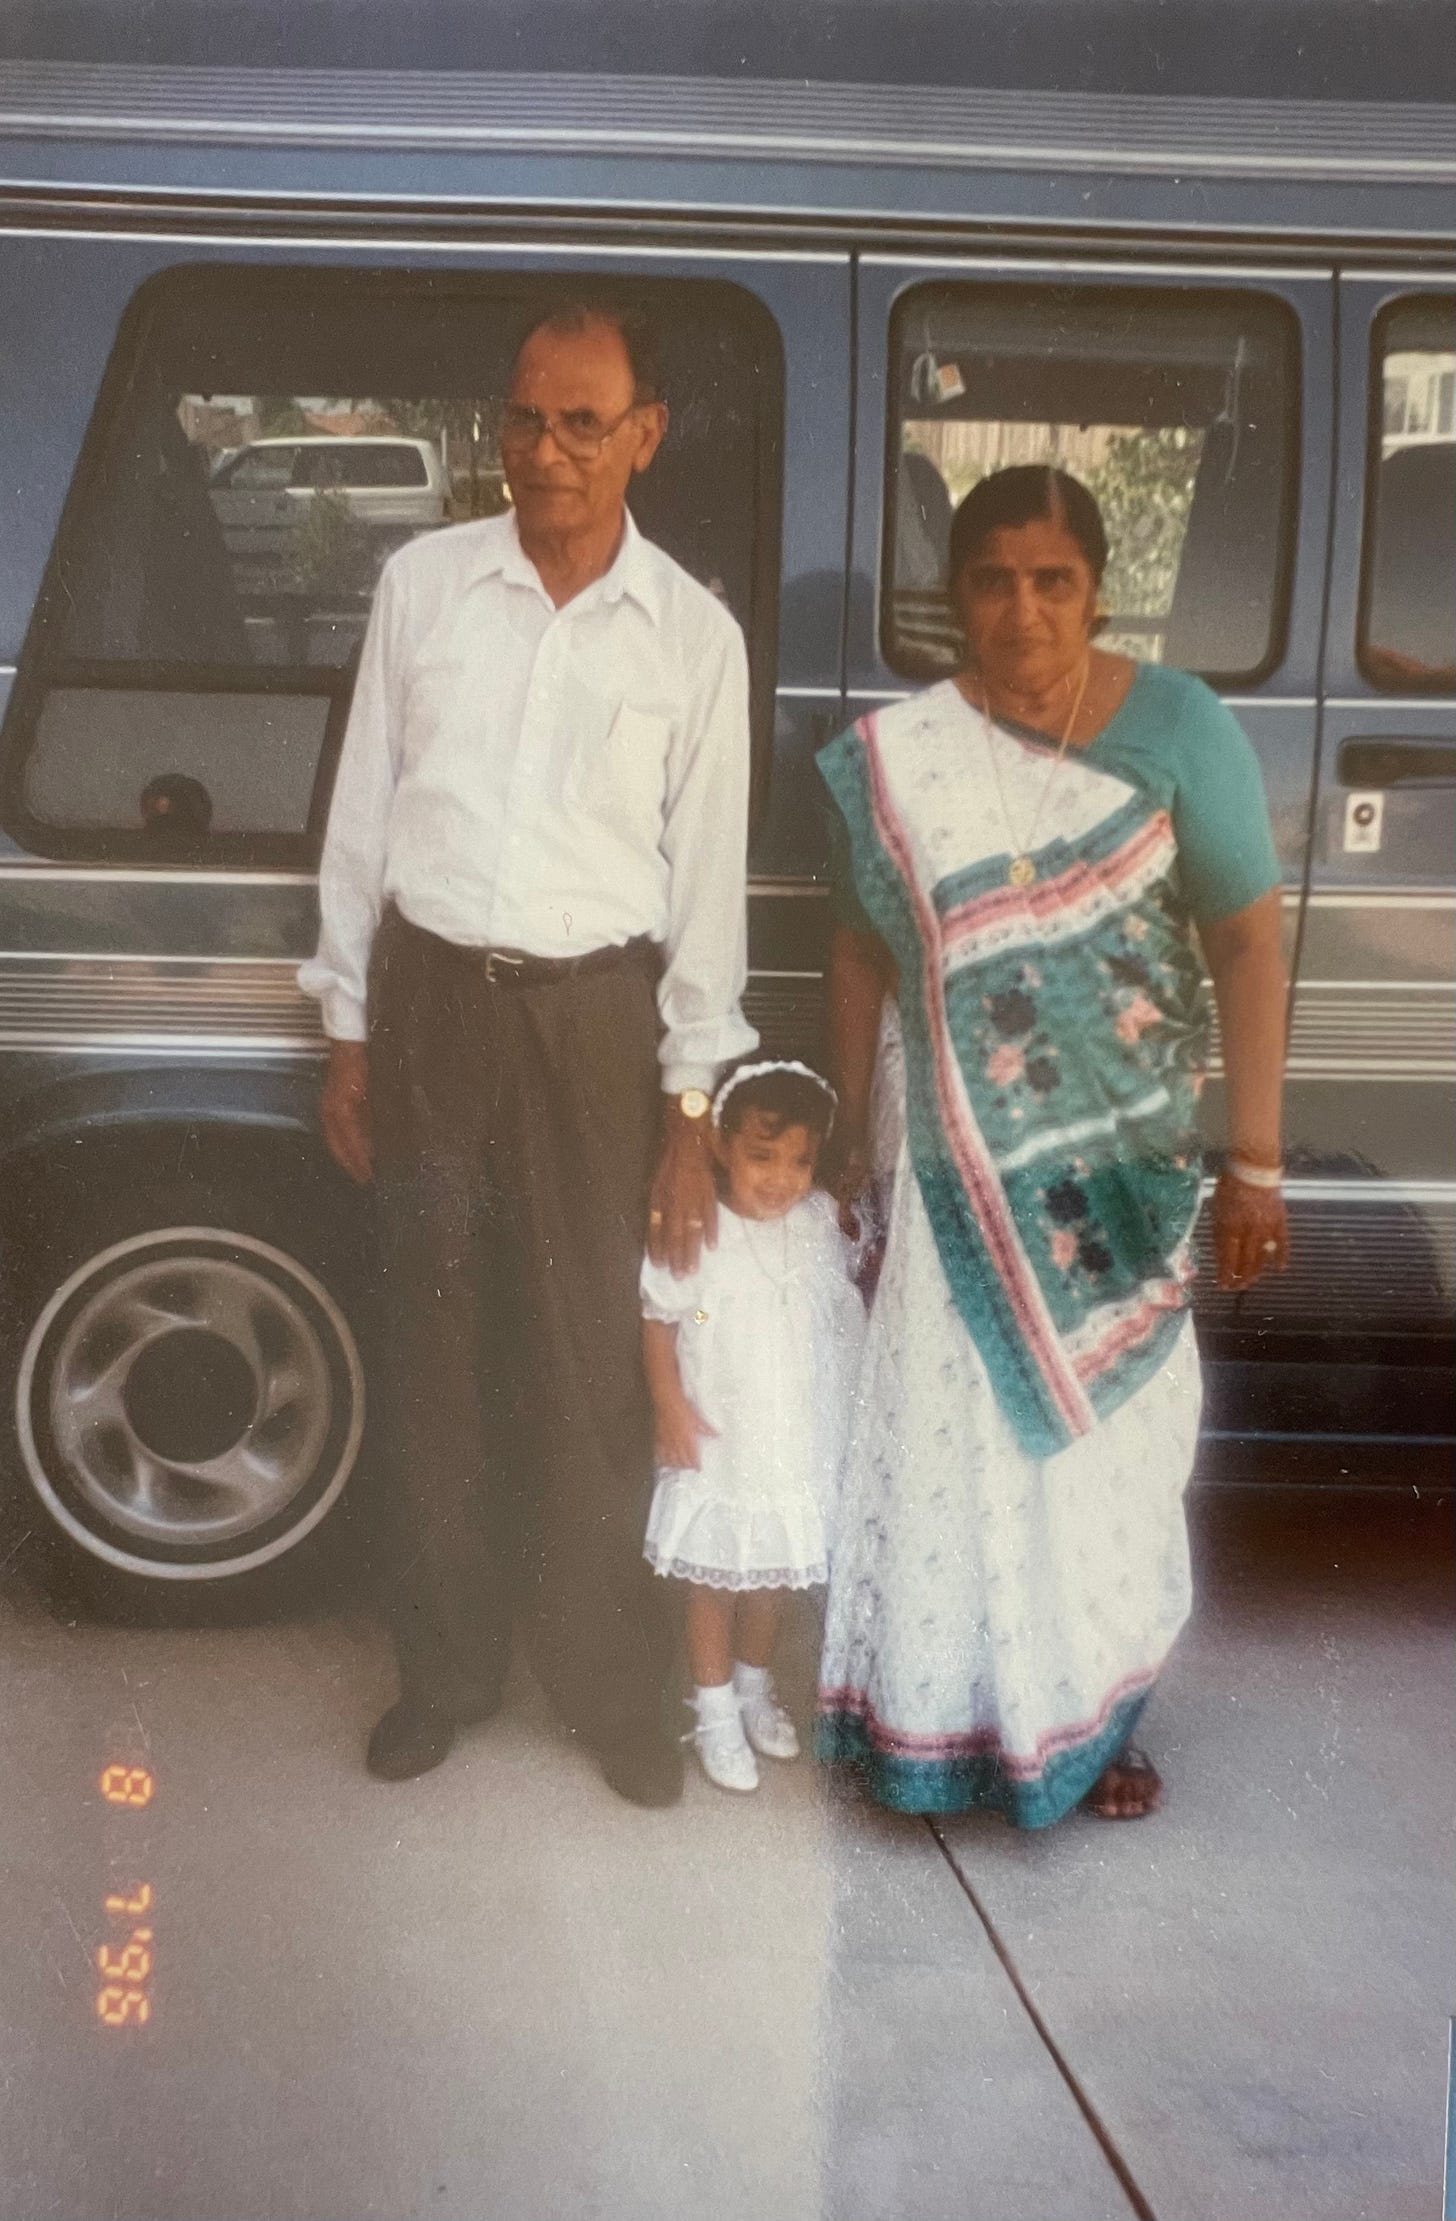 An elderly man wears a white shirt and dark dress pants. He stands with his left hand on a toddler's shoulder, who wears a white dress. A woman, right, wears a white, pink, and green saree, with her right hand on the toddler's shoulder. They stand in front of a blue van.